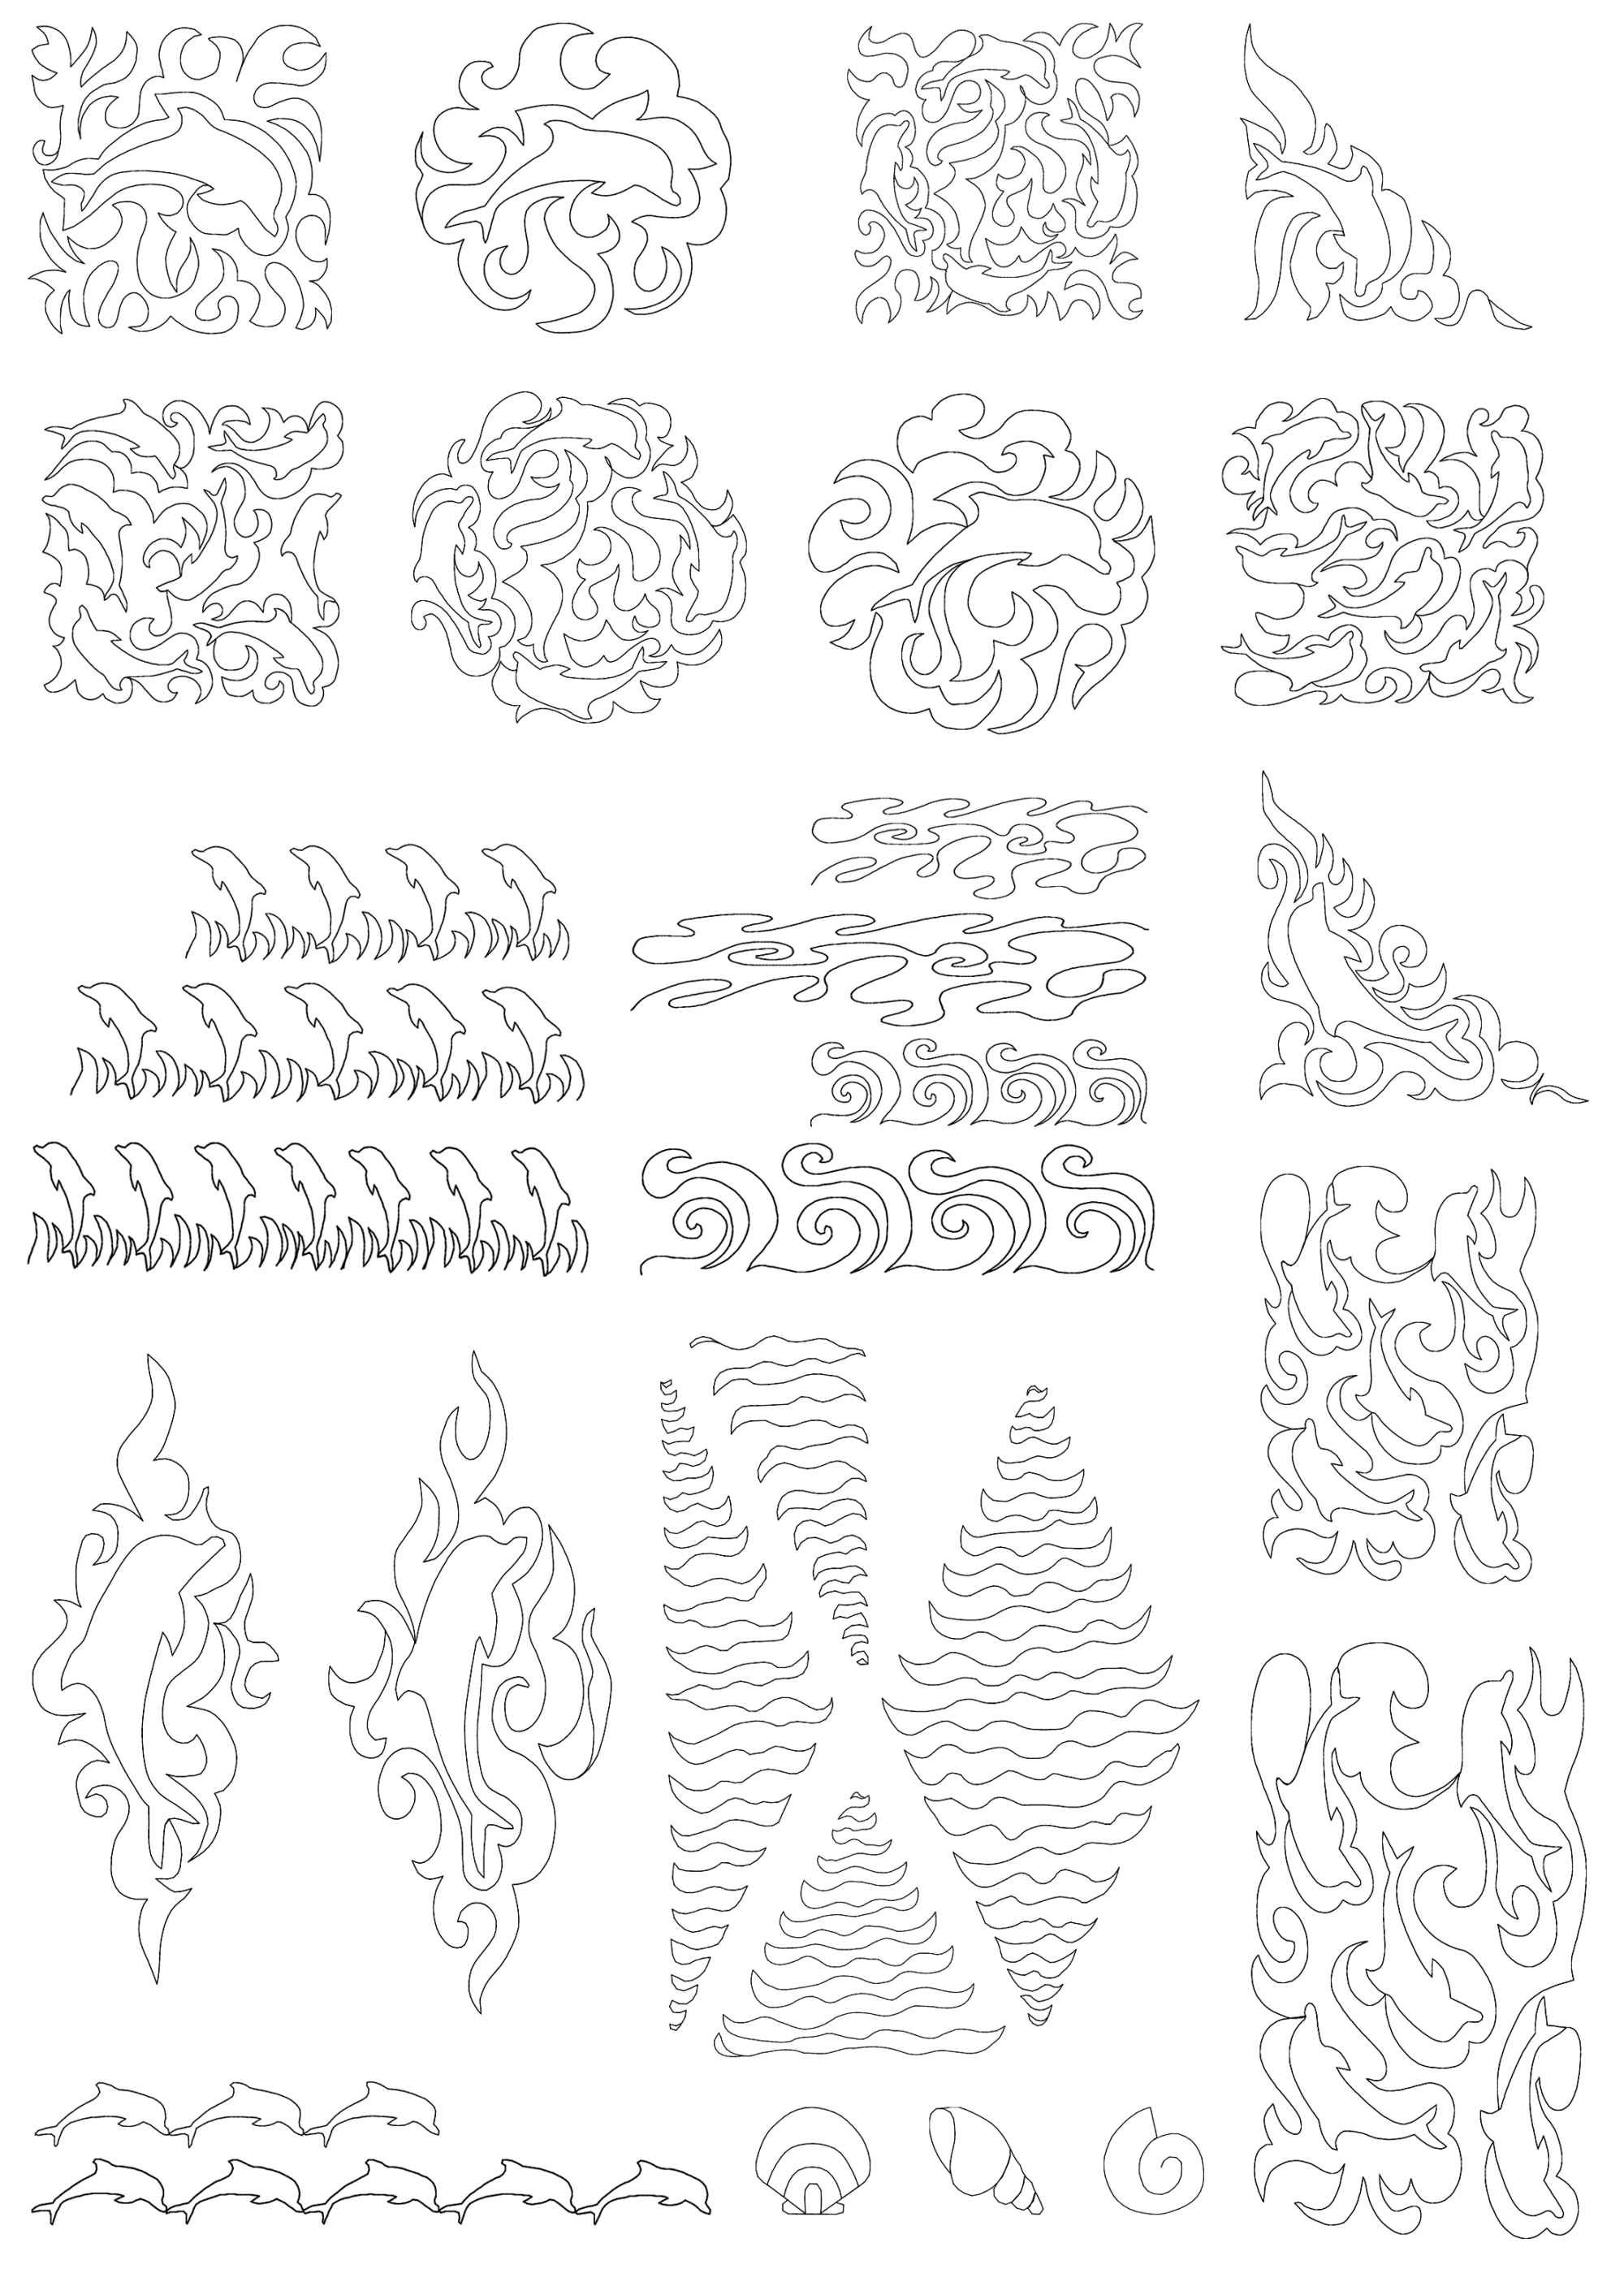 line images of the 22 designs, including dolphins, stylized ocean waves, and seashells